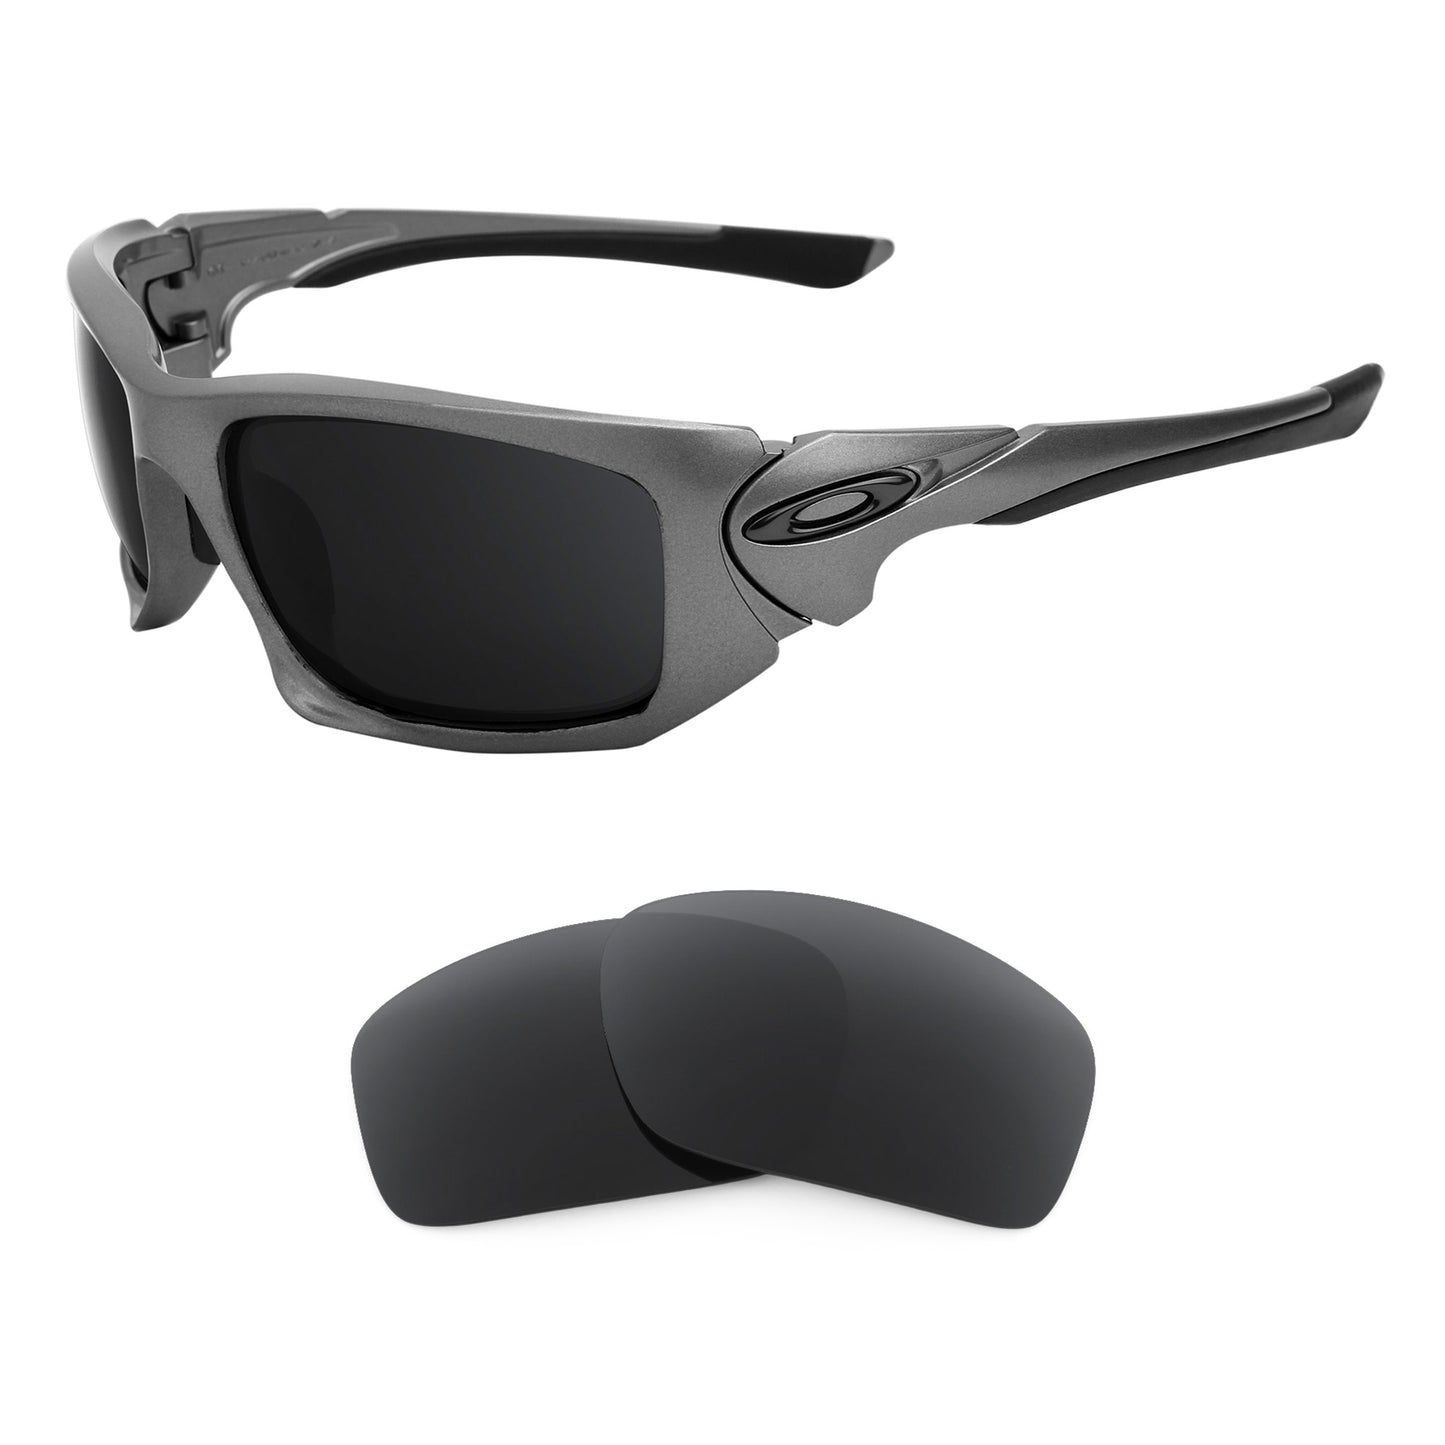 Oakley Scalpel sunglasses with replacement lenses